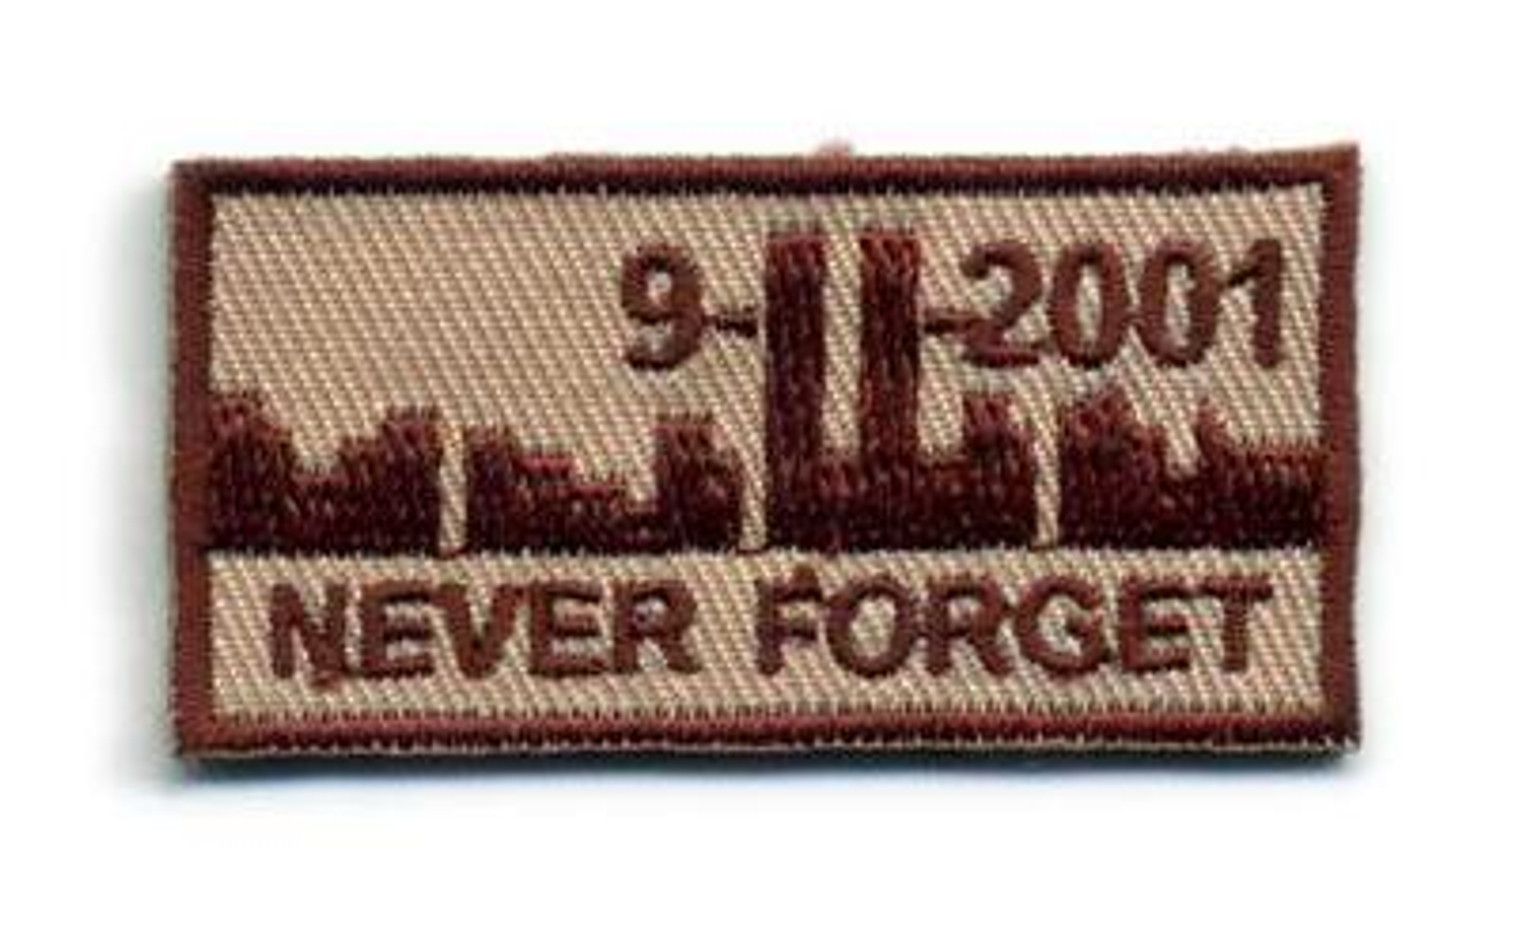 Embrodery 25mm IFF Never Forget 911 Military Hook & Loop Ready Patch - TAN